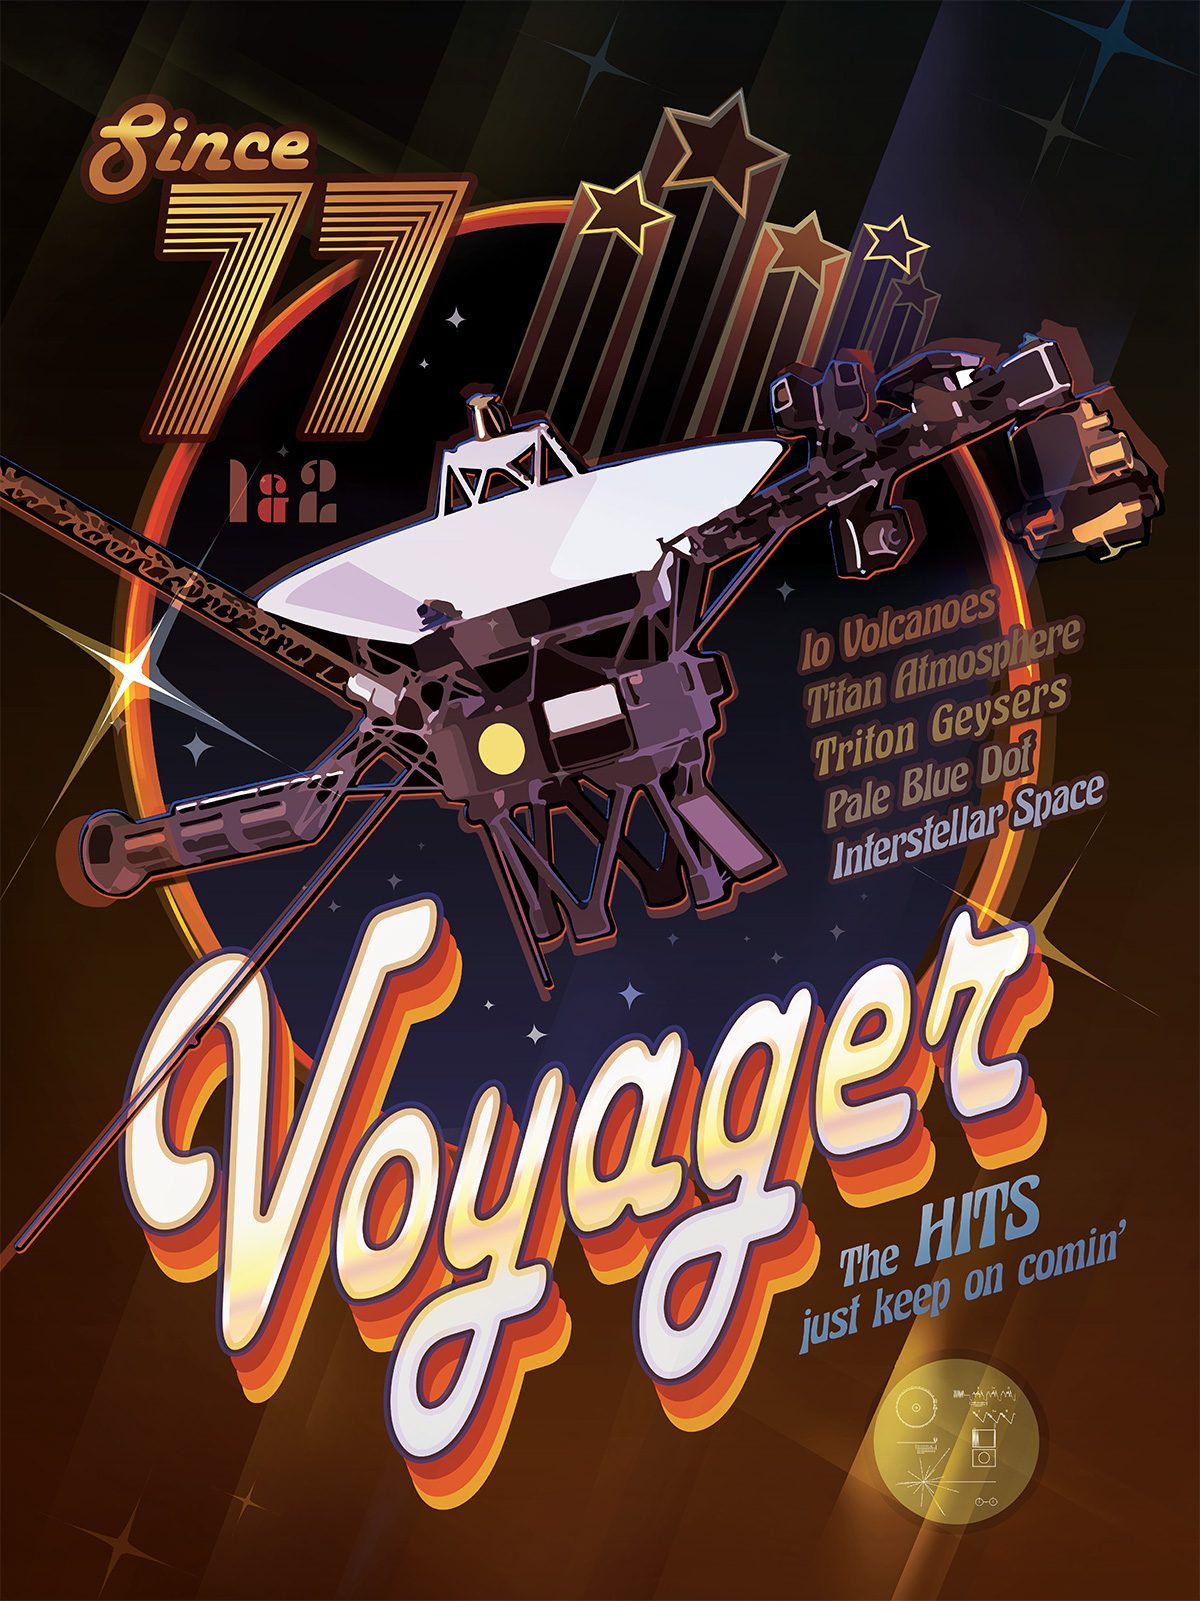 This Voyager poster is made to look like a 1970s poster. It says Voyager: Since '77. The hits just keep on coming. Io Volcanoes. Titan Atmosphere. Triton Geysers. Pale Blue Dot. Interstellar Space.